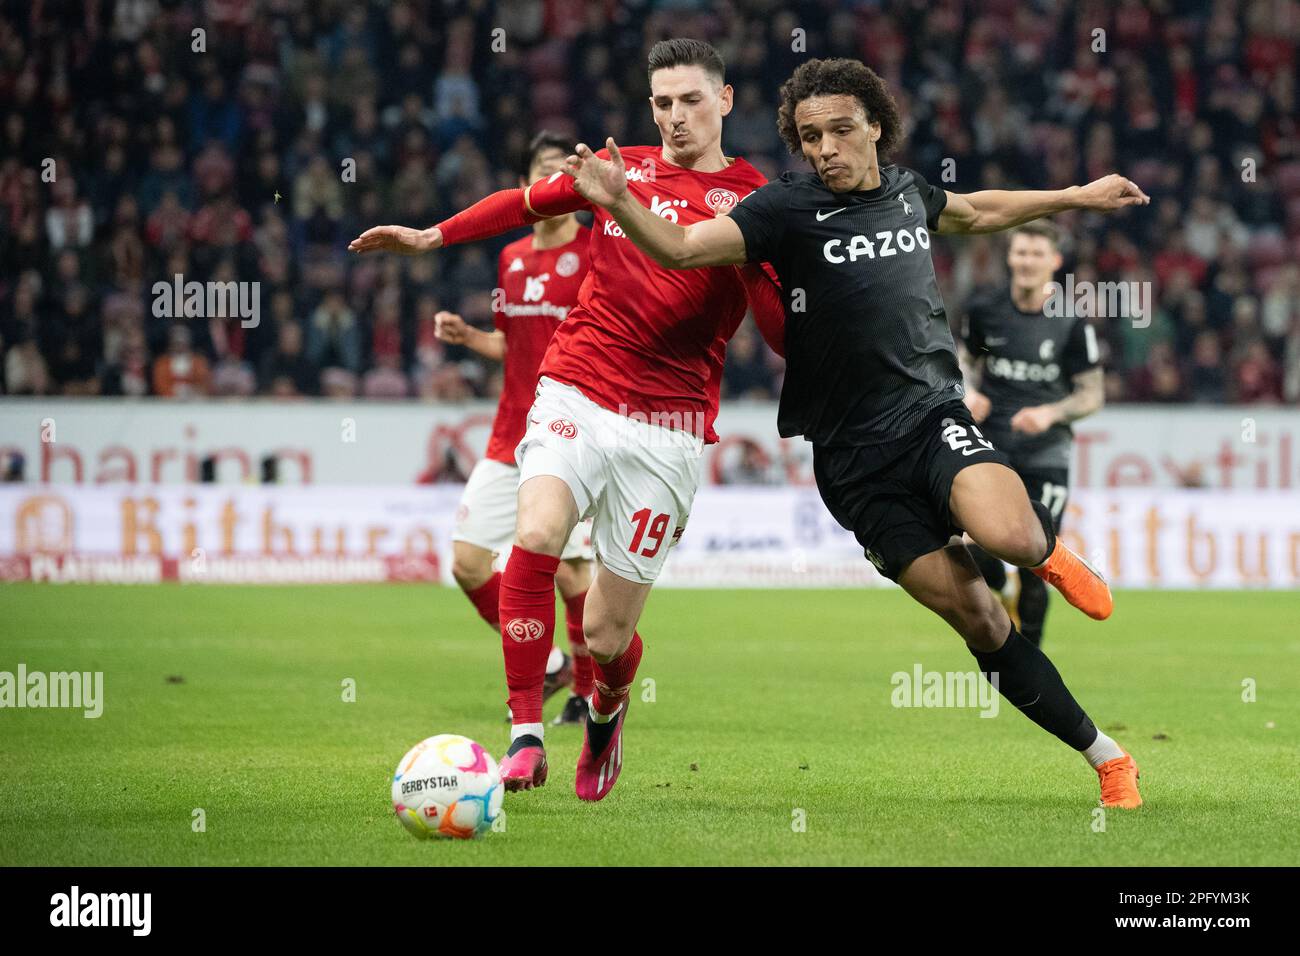 Mainz, Germany. 19th Mar, 2023. Soccer: Bundesliga, FSV Mainz 05 - SC Freiburg, Matchday 25, Mewa Arena. Mainz's Anthony Caci (l) and Freiburg's Kiliann Sildillia fight for the ball. Credit: Sebastian Gollnow/dpa - IMPORTANT NOTE: In accordance with the requirements of the DFL Deutsche Fußball Liga and the DFB Deutscher Fußball-Bund, it is prohibited to use or have used photographs taken in the stadium and/or of the match in the form of sequence pictures and/or video-like photo series./dpa/Alamy Live News Stock Photo